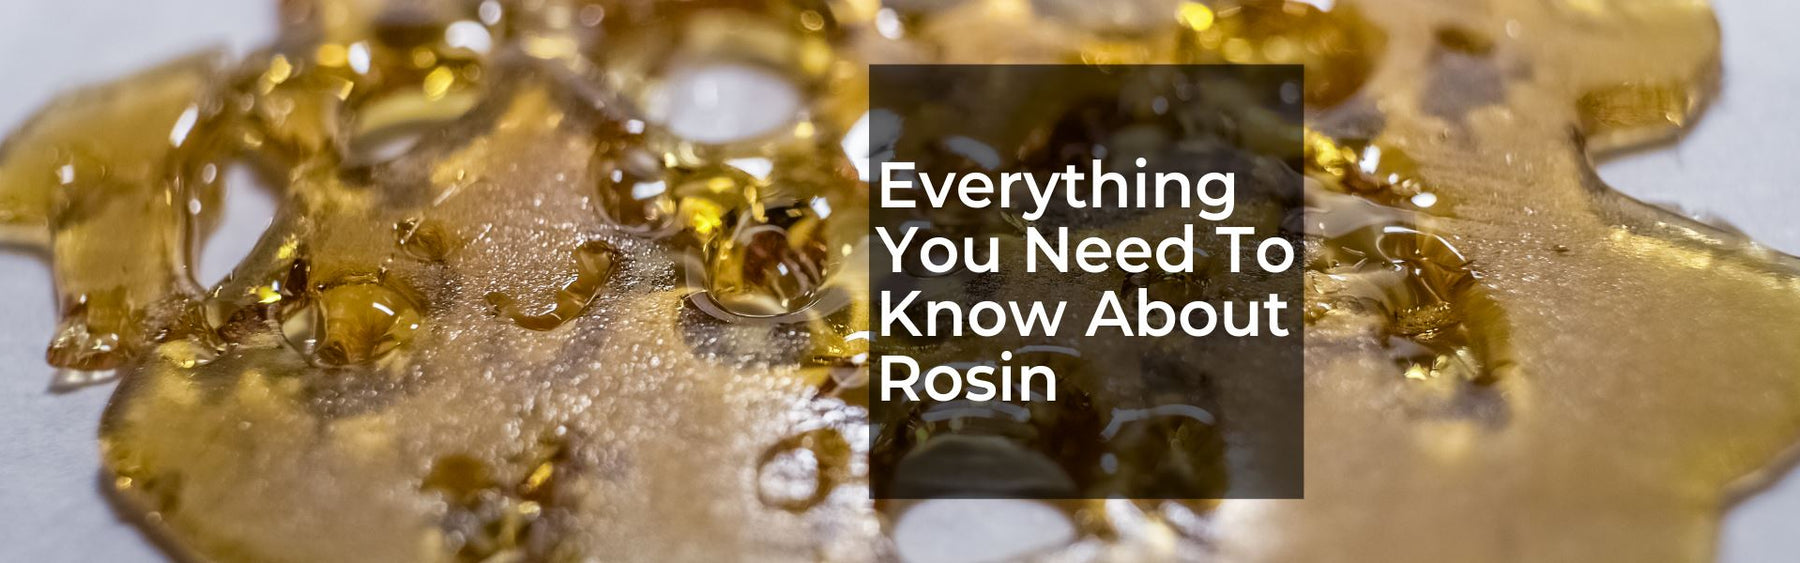 What Is Rosin And Why Is Everyone Raving About It